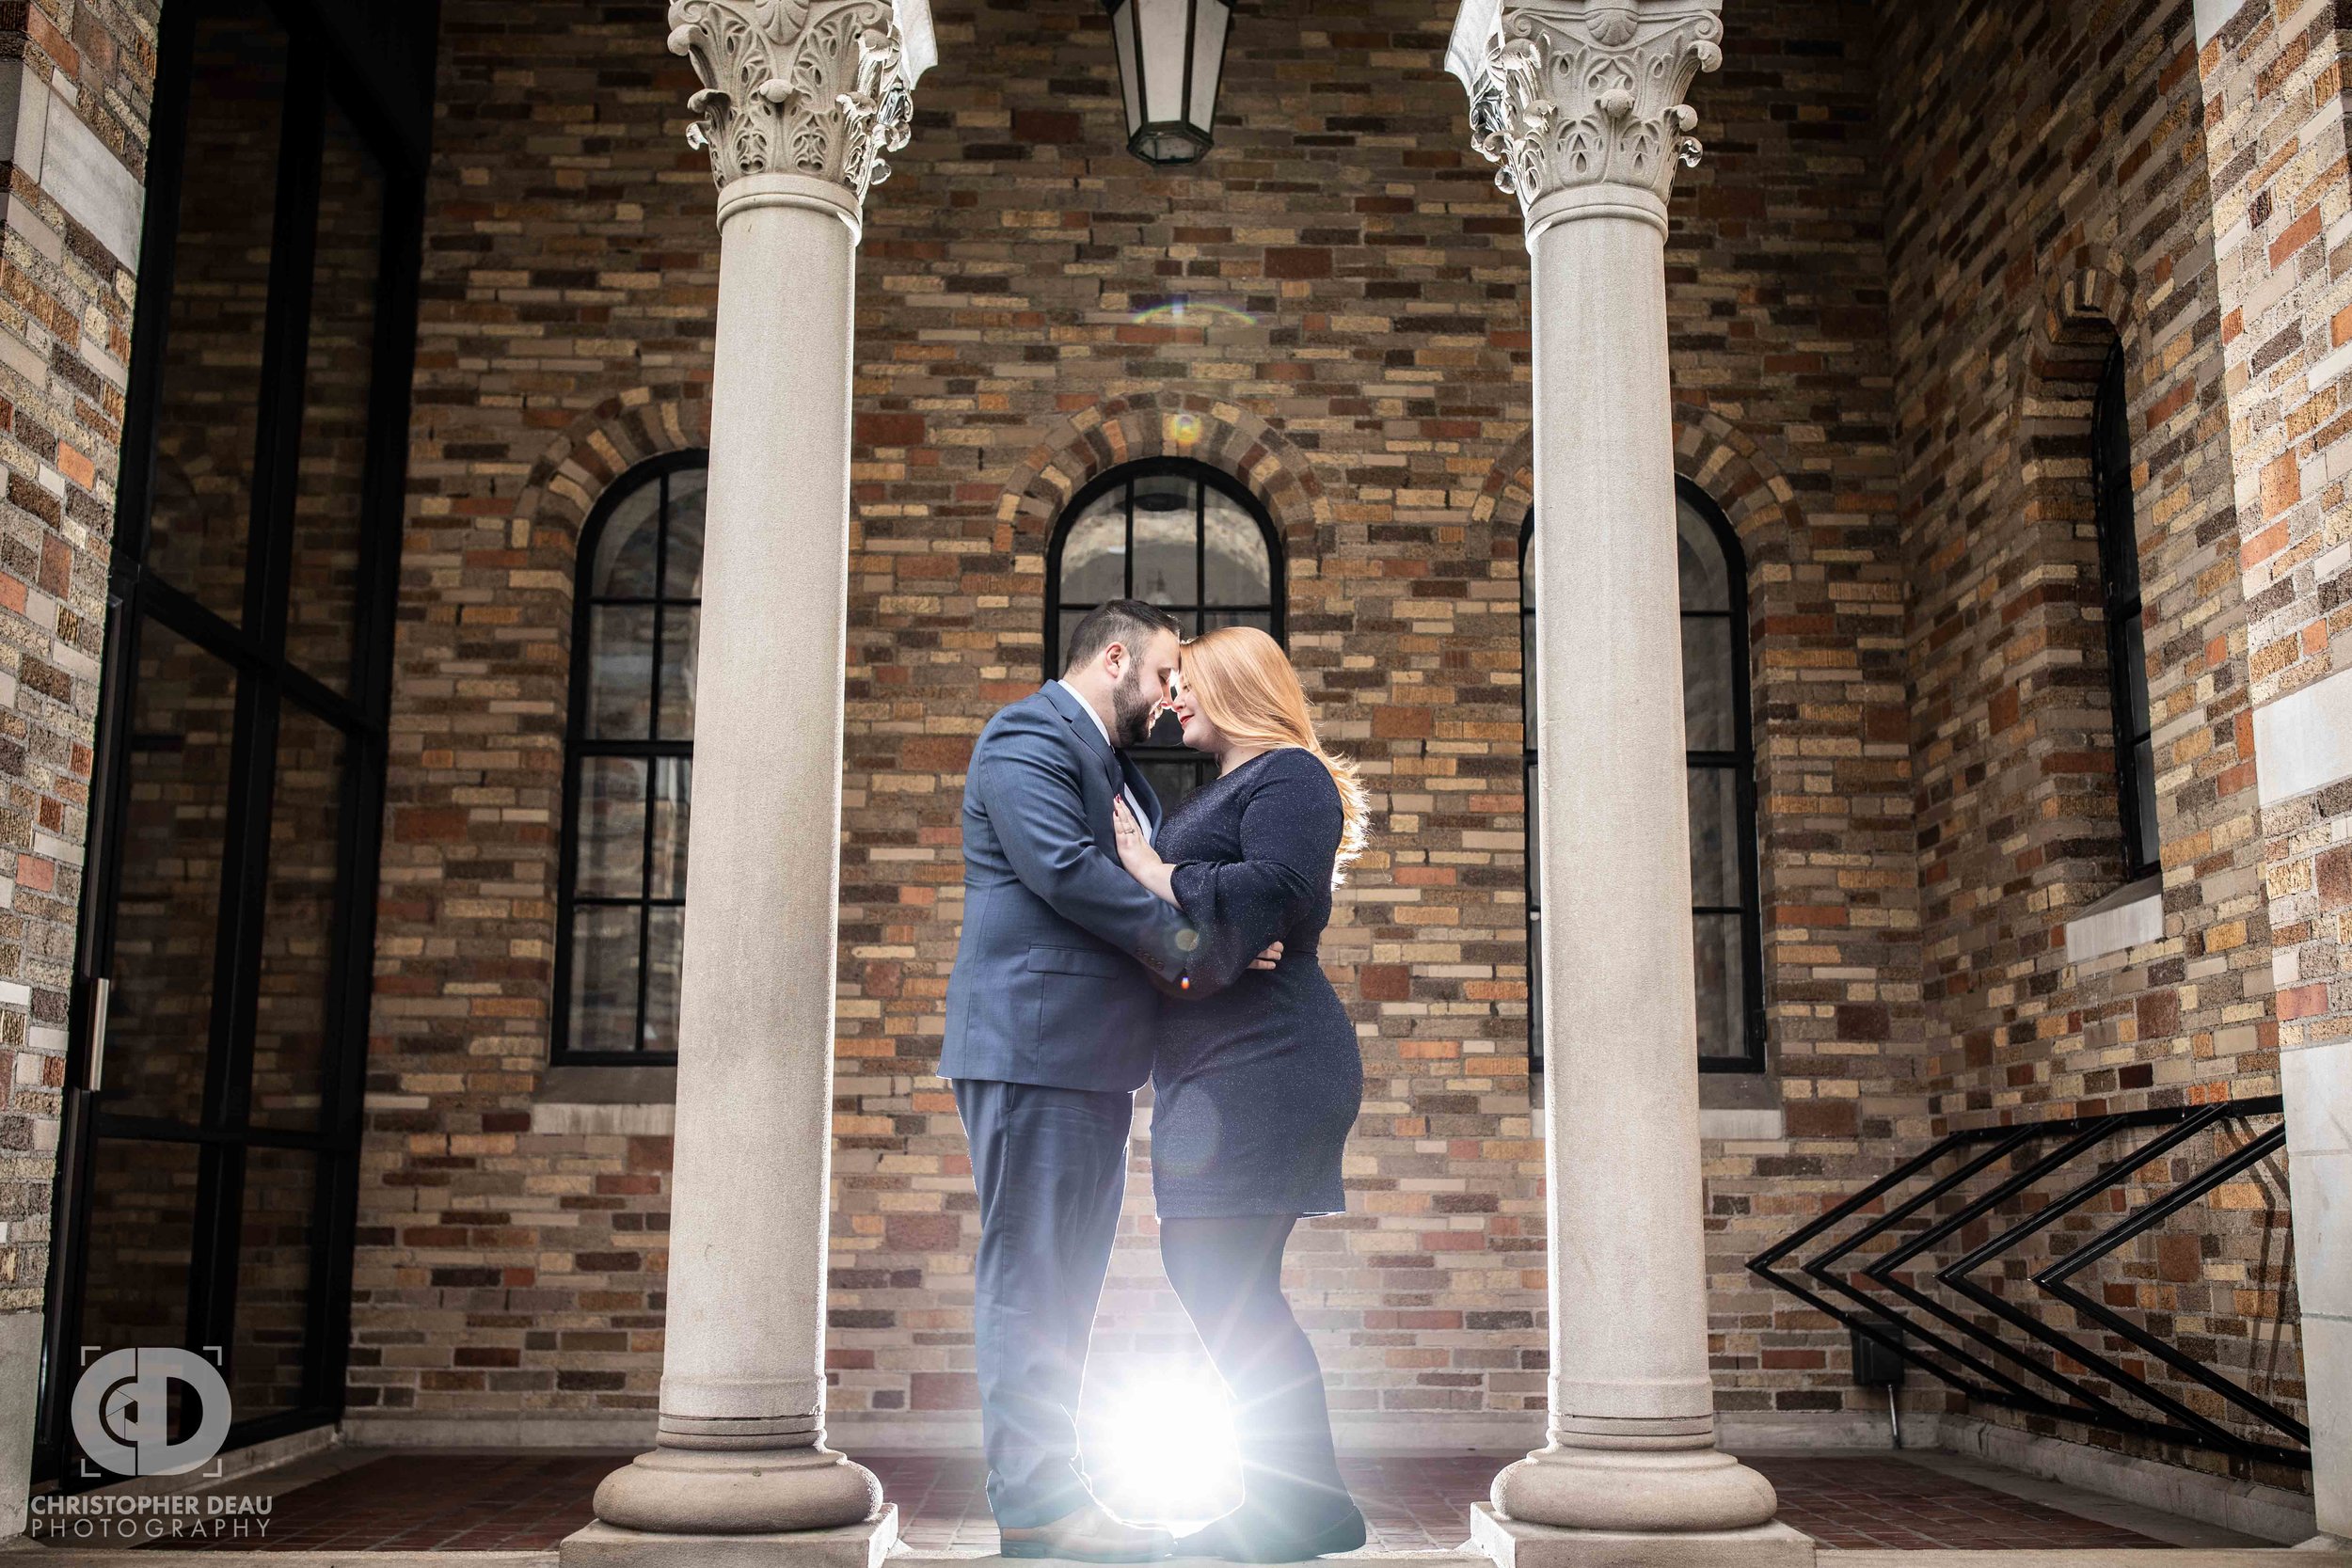  Unique engagement session photo at the fountain street church in Grand Rapids 